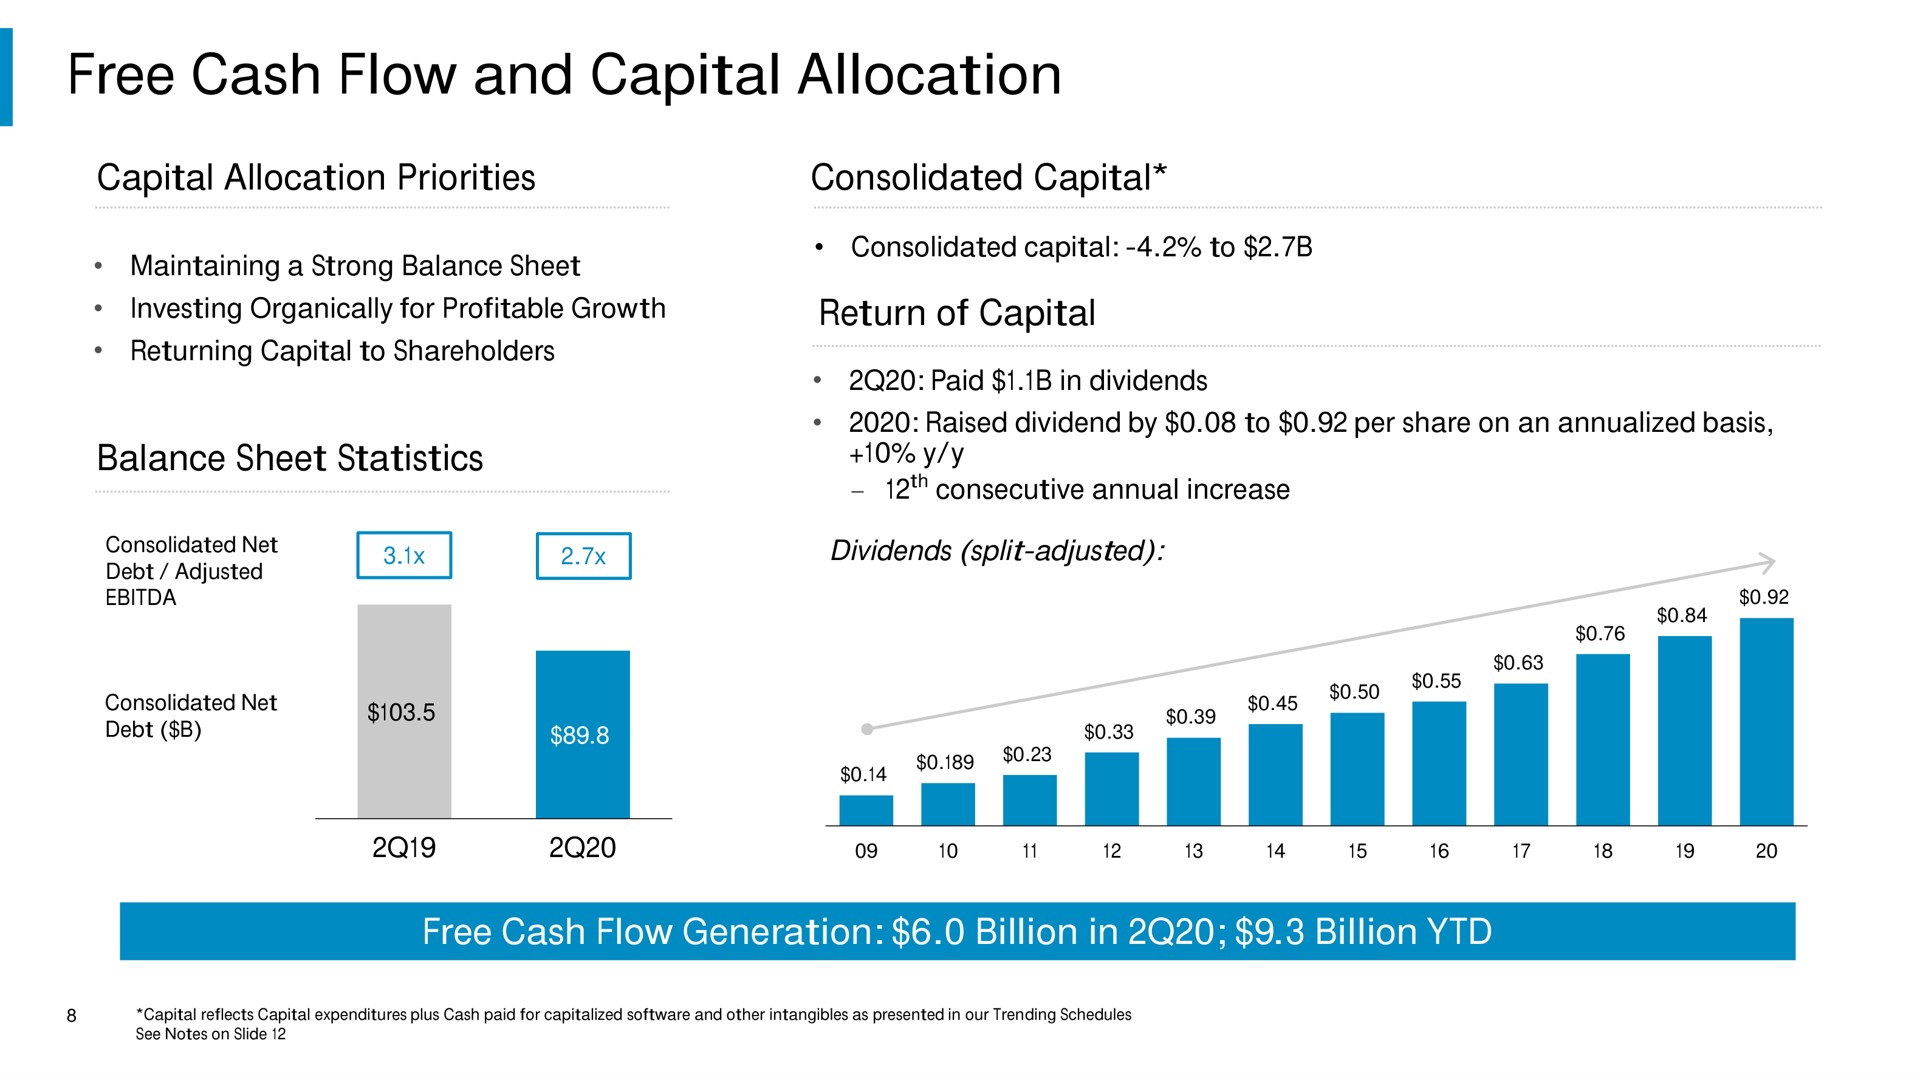 free cash flow and capital allocation priorities consolidated maintaining a strong balance sheet investing organically for profitable growth returning to shareholders balance sheet statistics consolidated to return of raised dividend by to per share on an basis dividends split adjusted generation billion in billion | Comcast